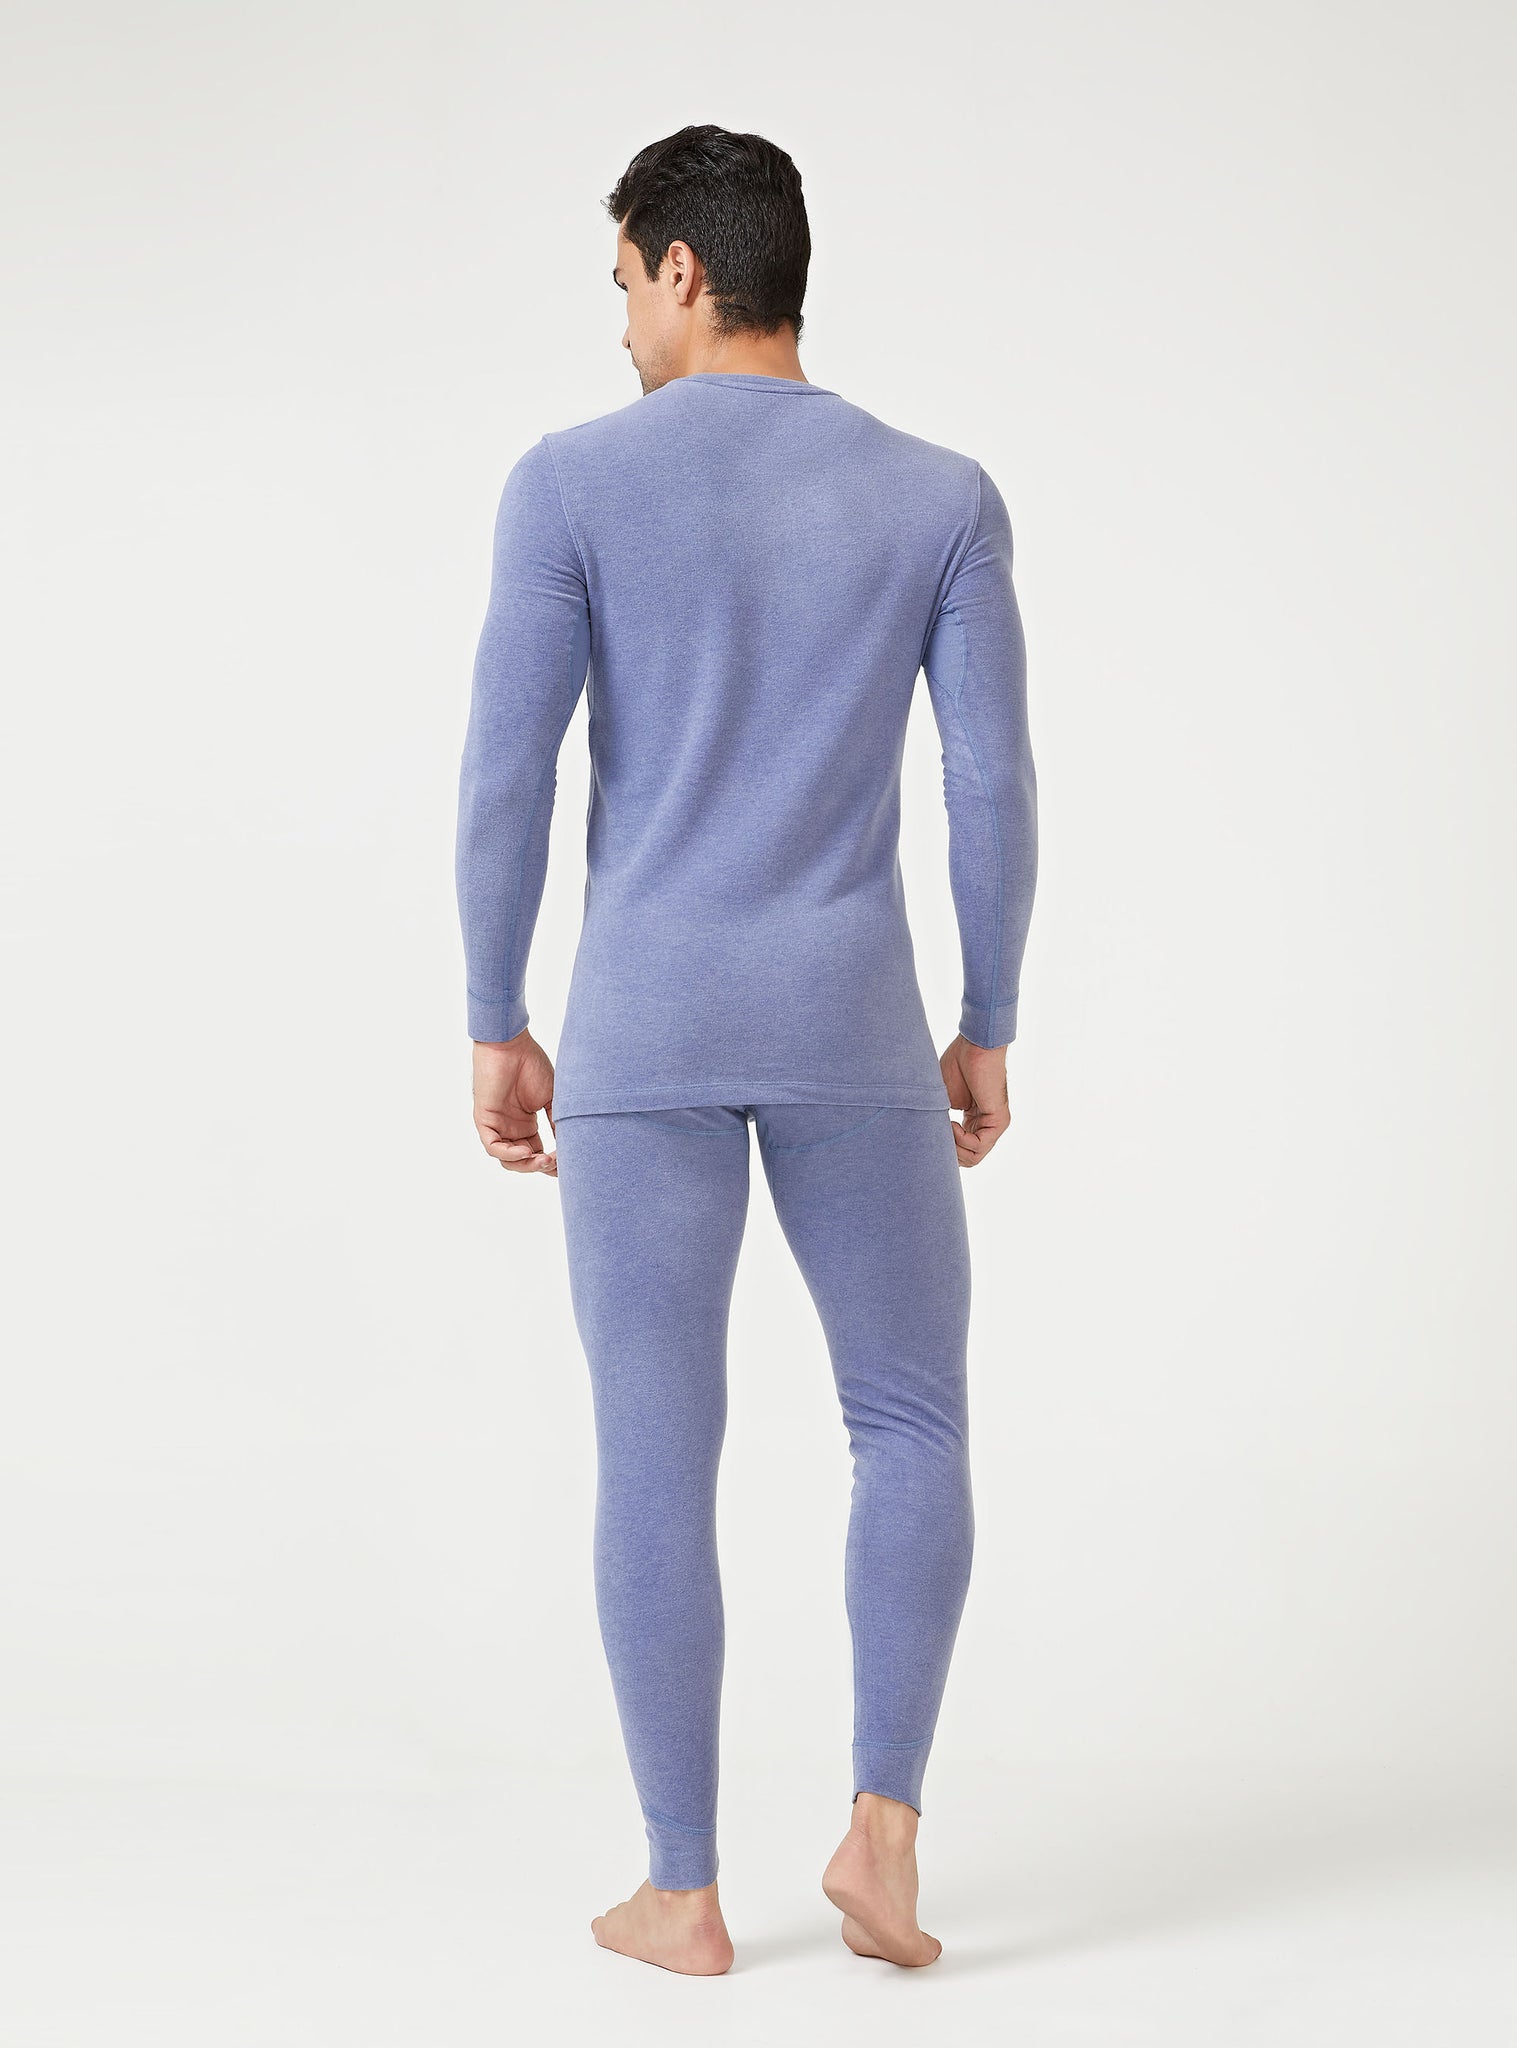 David Archy® Men’s Warm Base Layers Thermal Set Winter Inner Wear Ultra Soft Brushed Fleece Lined Long Johns-Thermal-David Archy